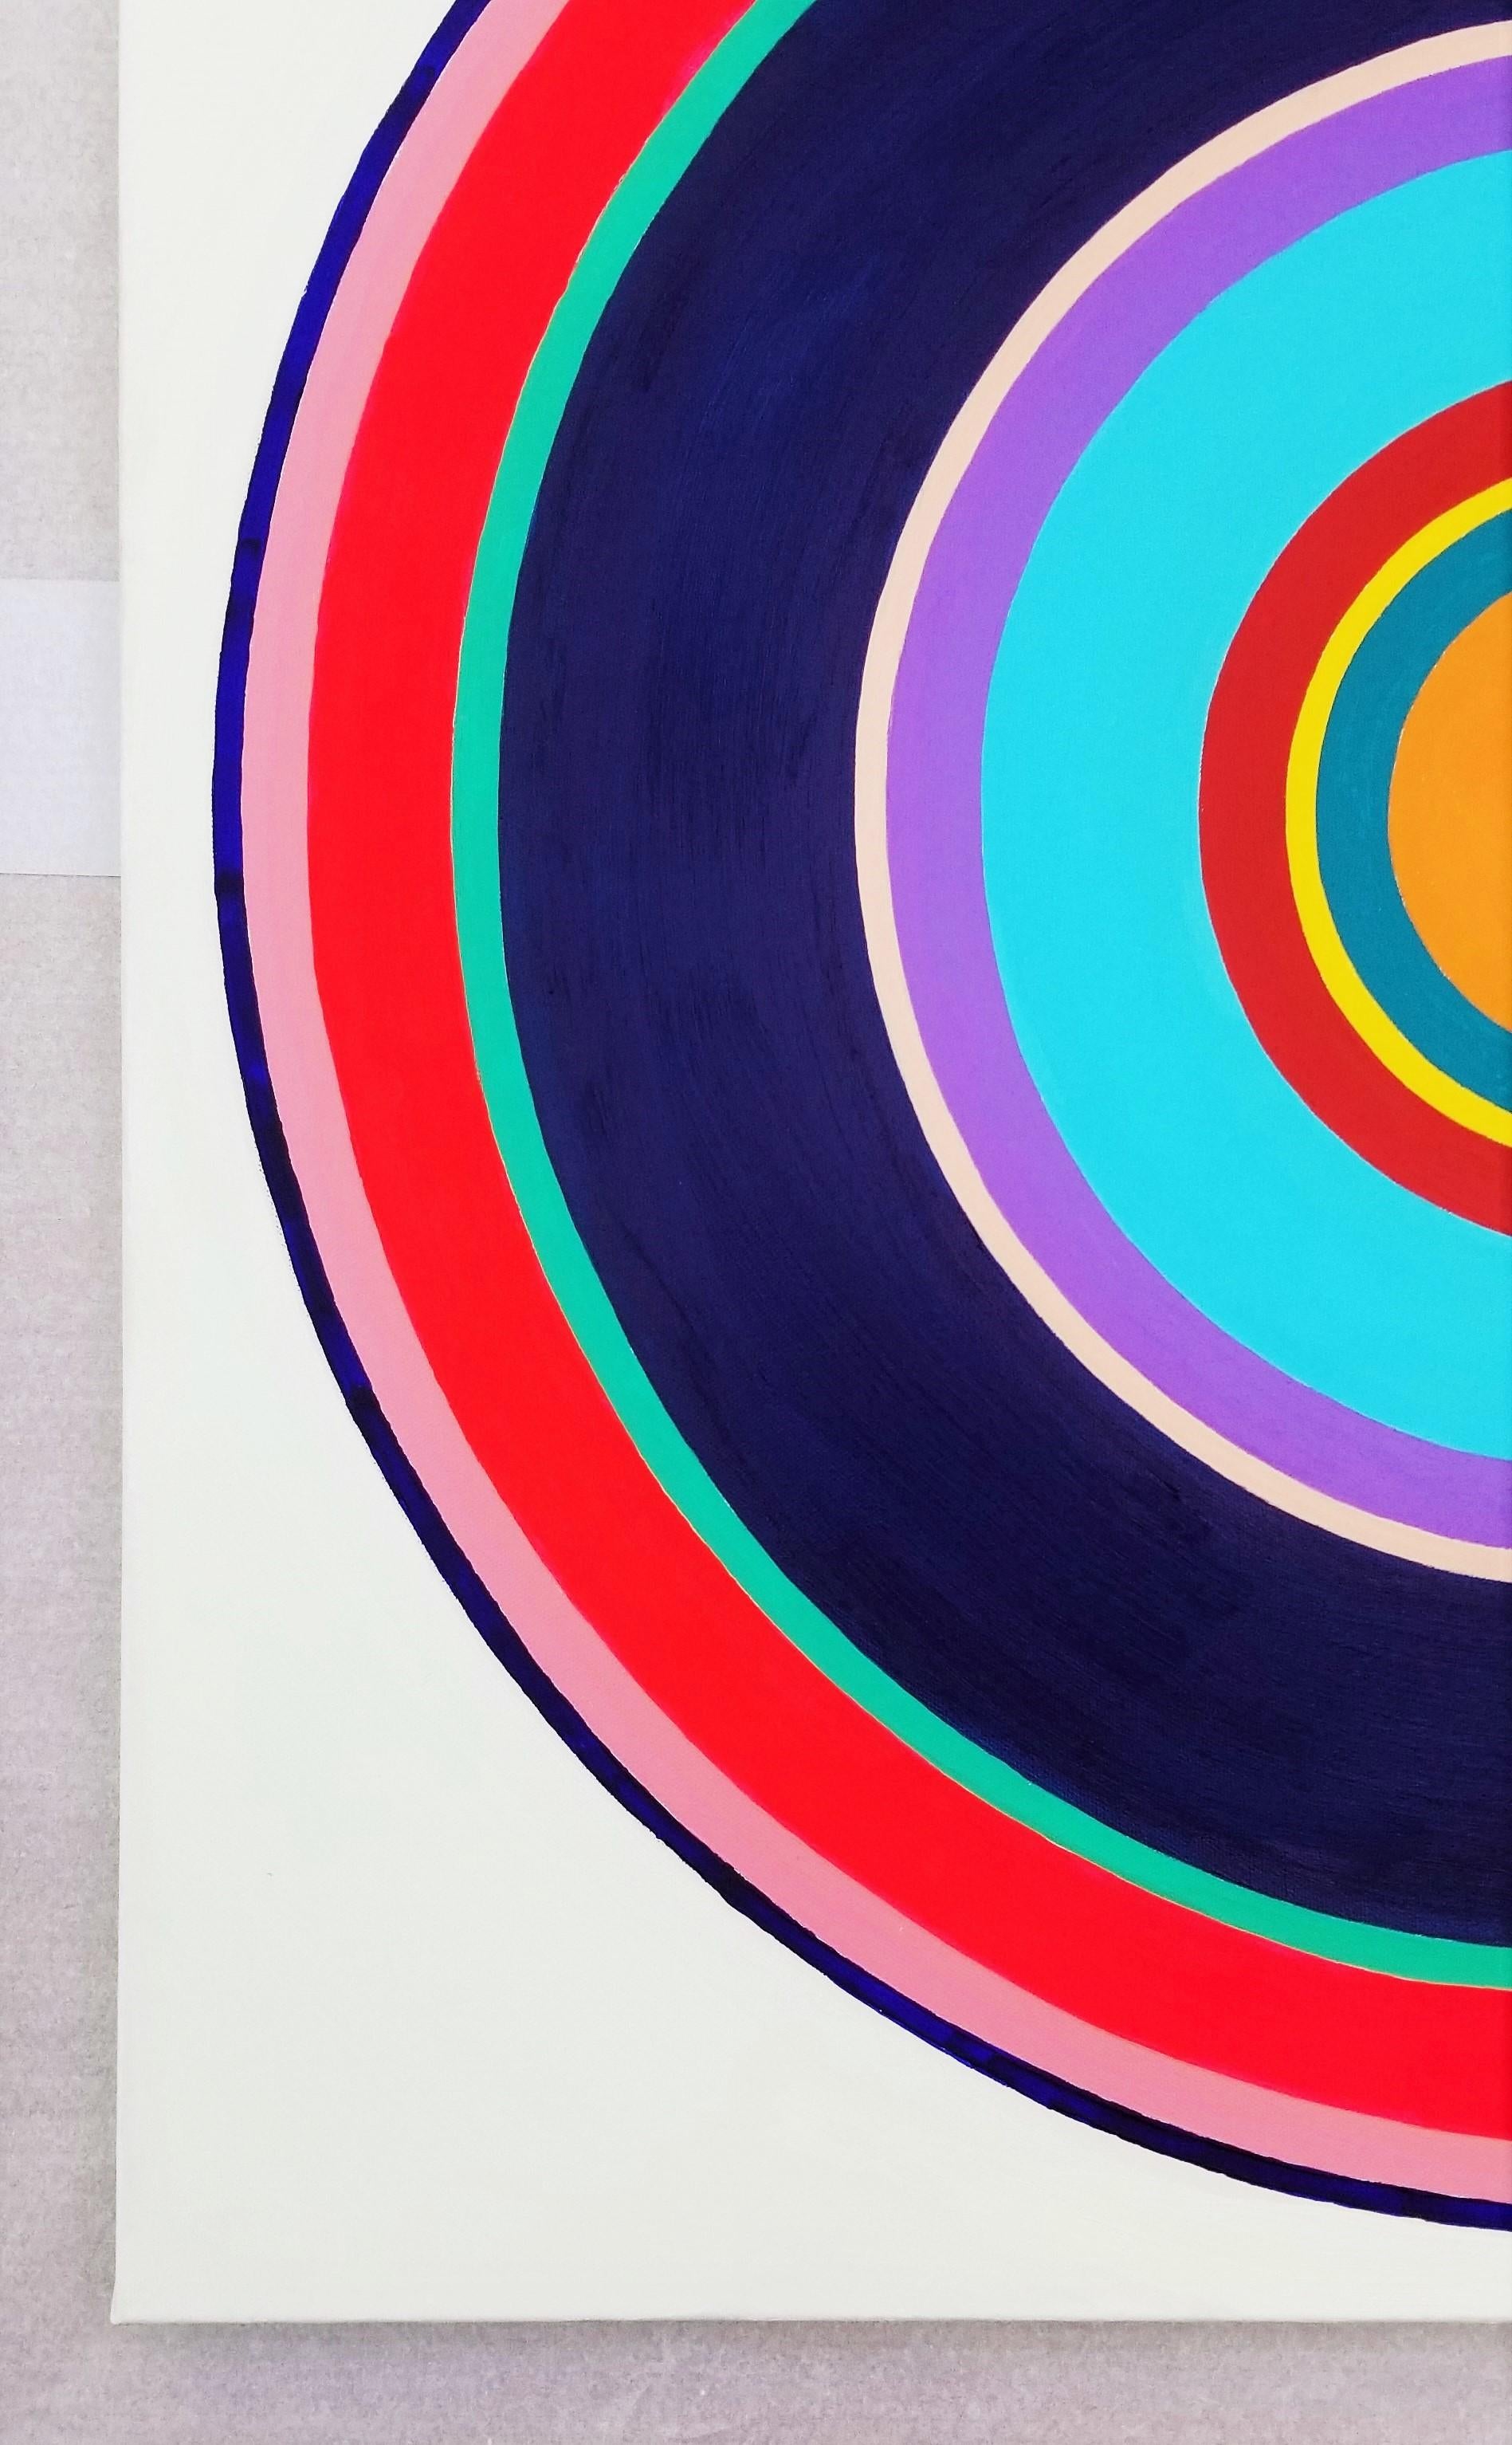 Aura V /// Contemporary Abstract Geometric Circles Colorful Art Striped Minimal - Painting by Jack Graves III